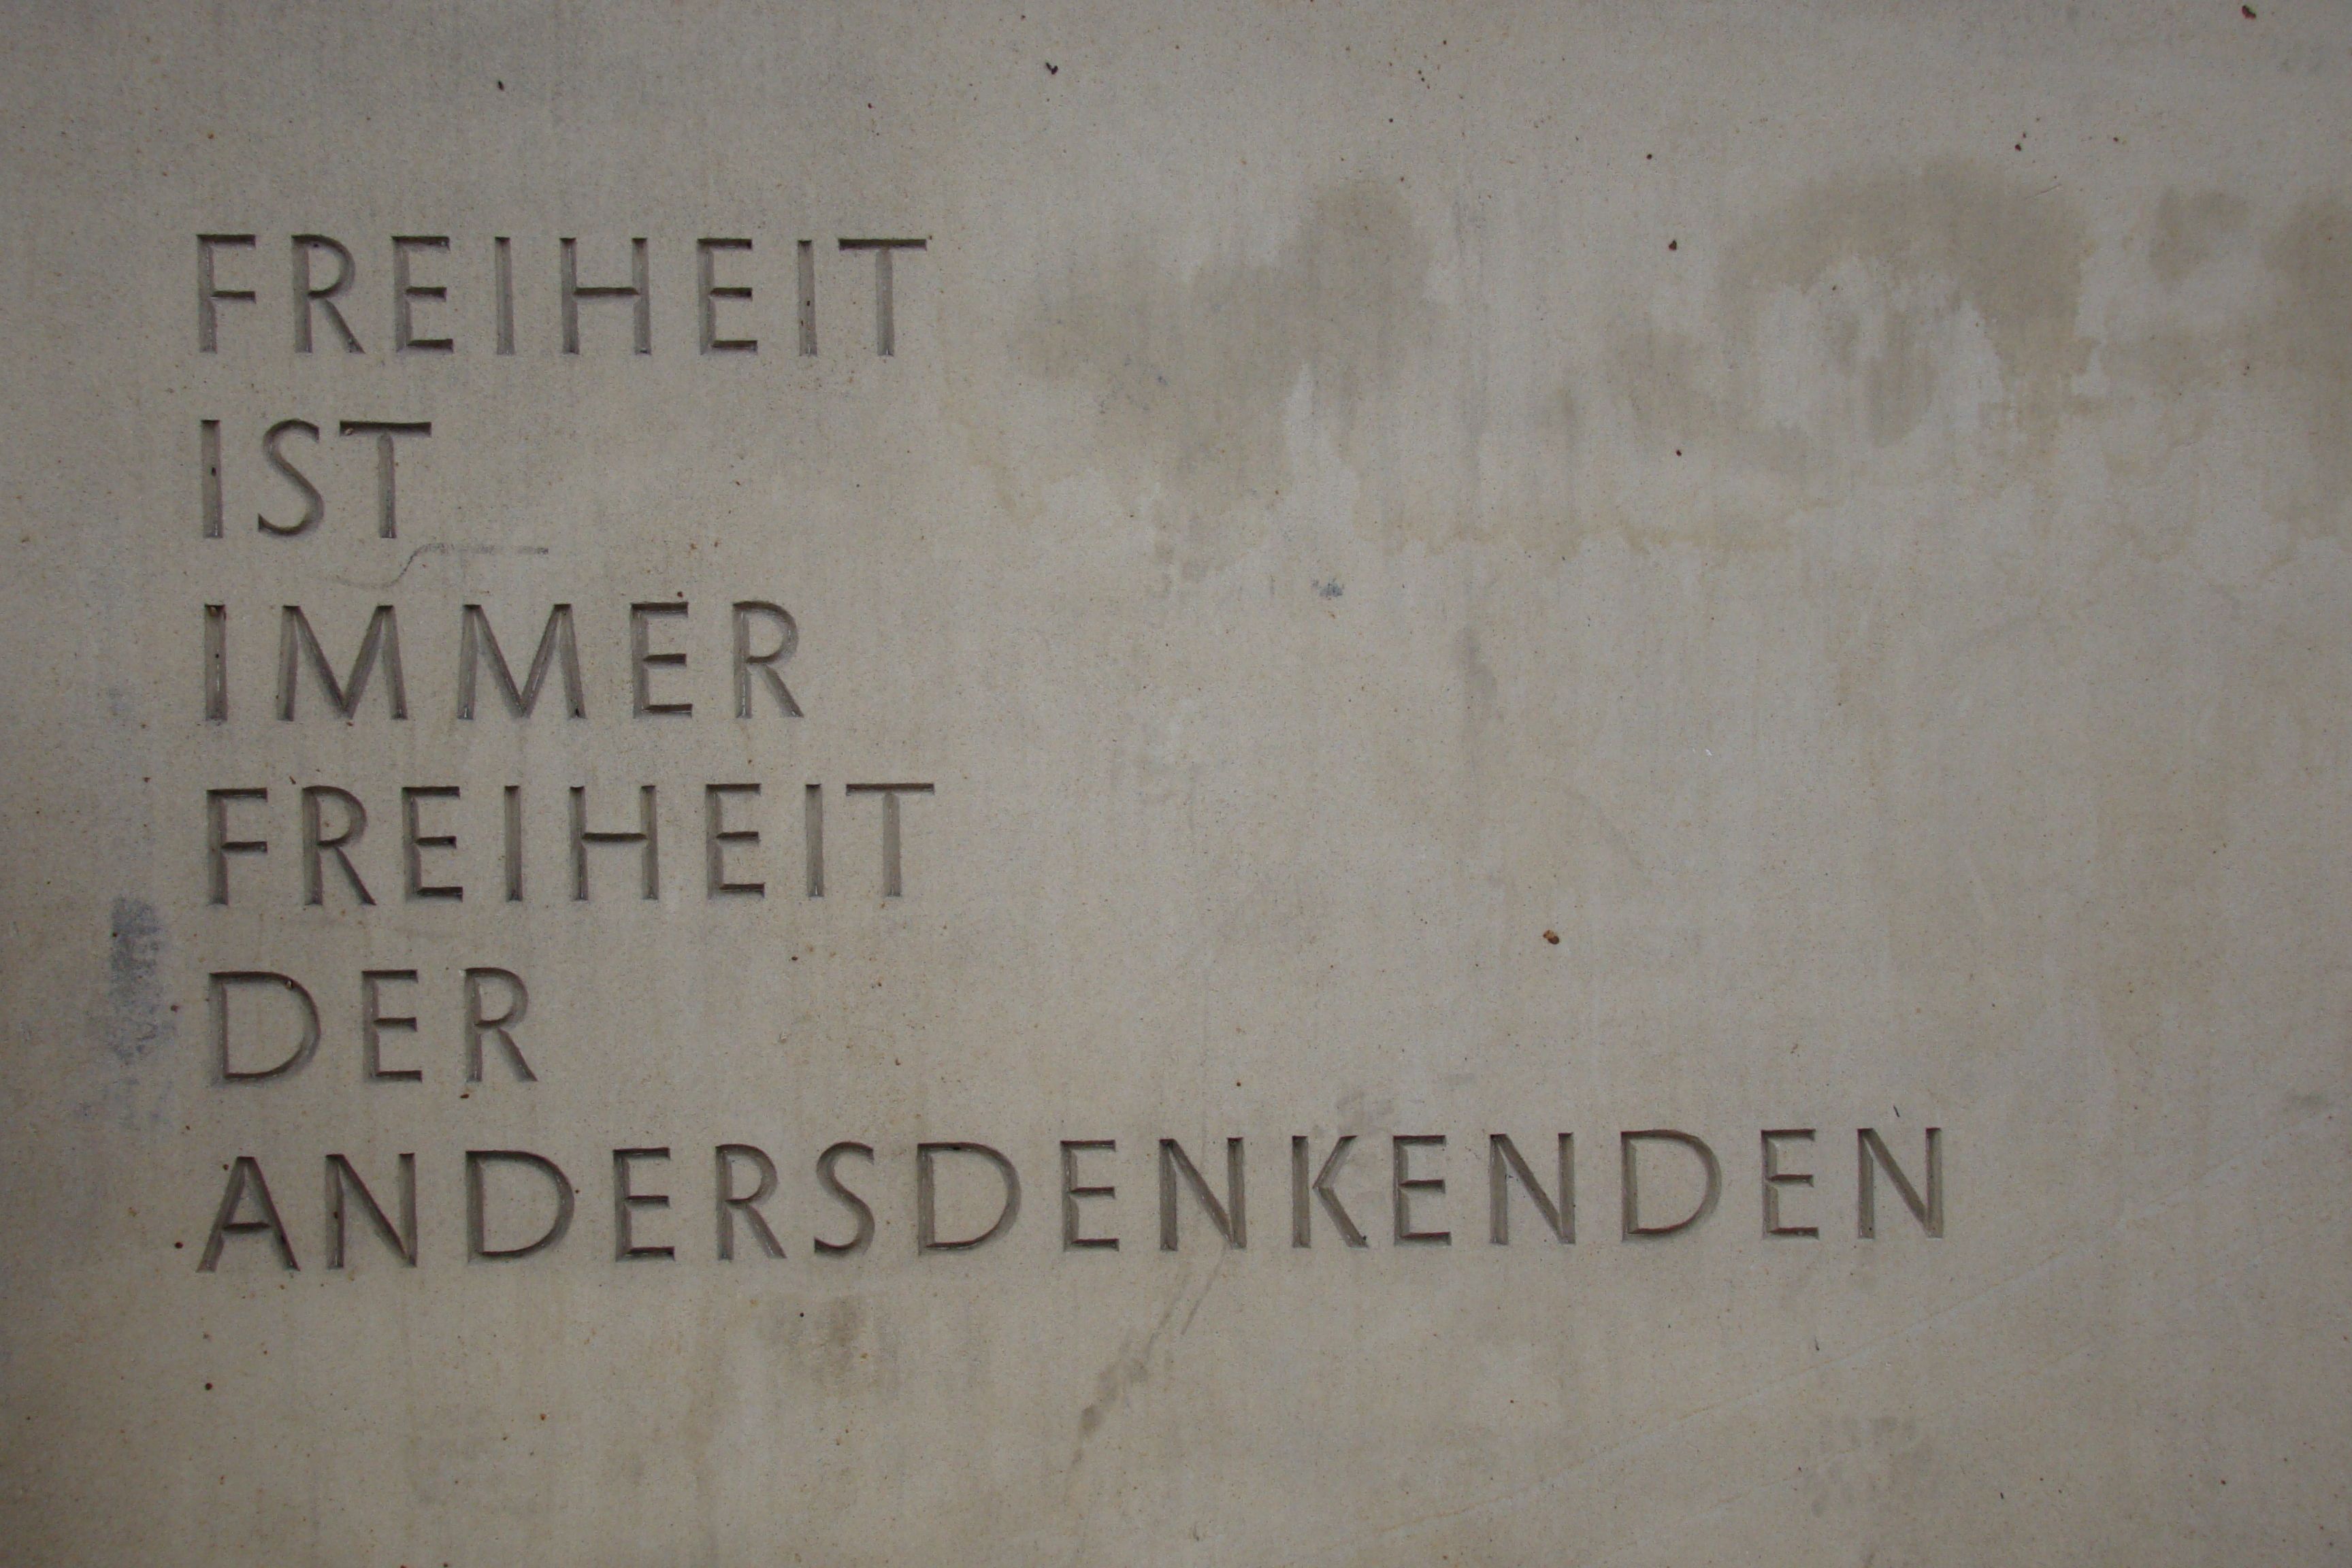 Inscription from the Rosa Luxemburg Monument in Dresden